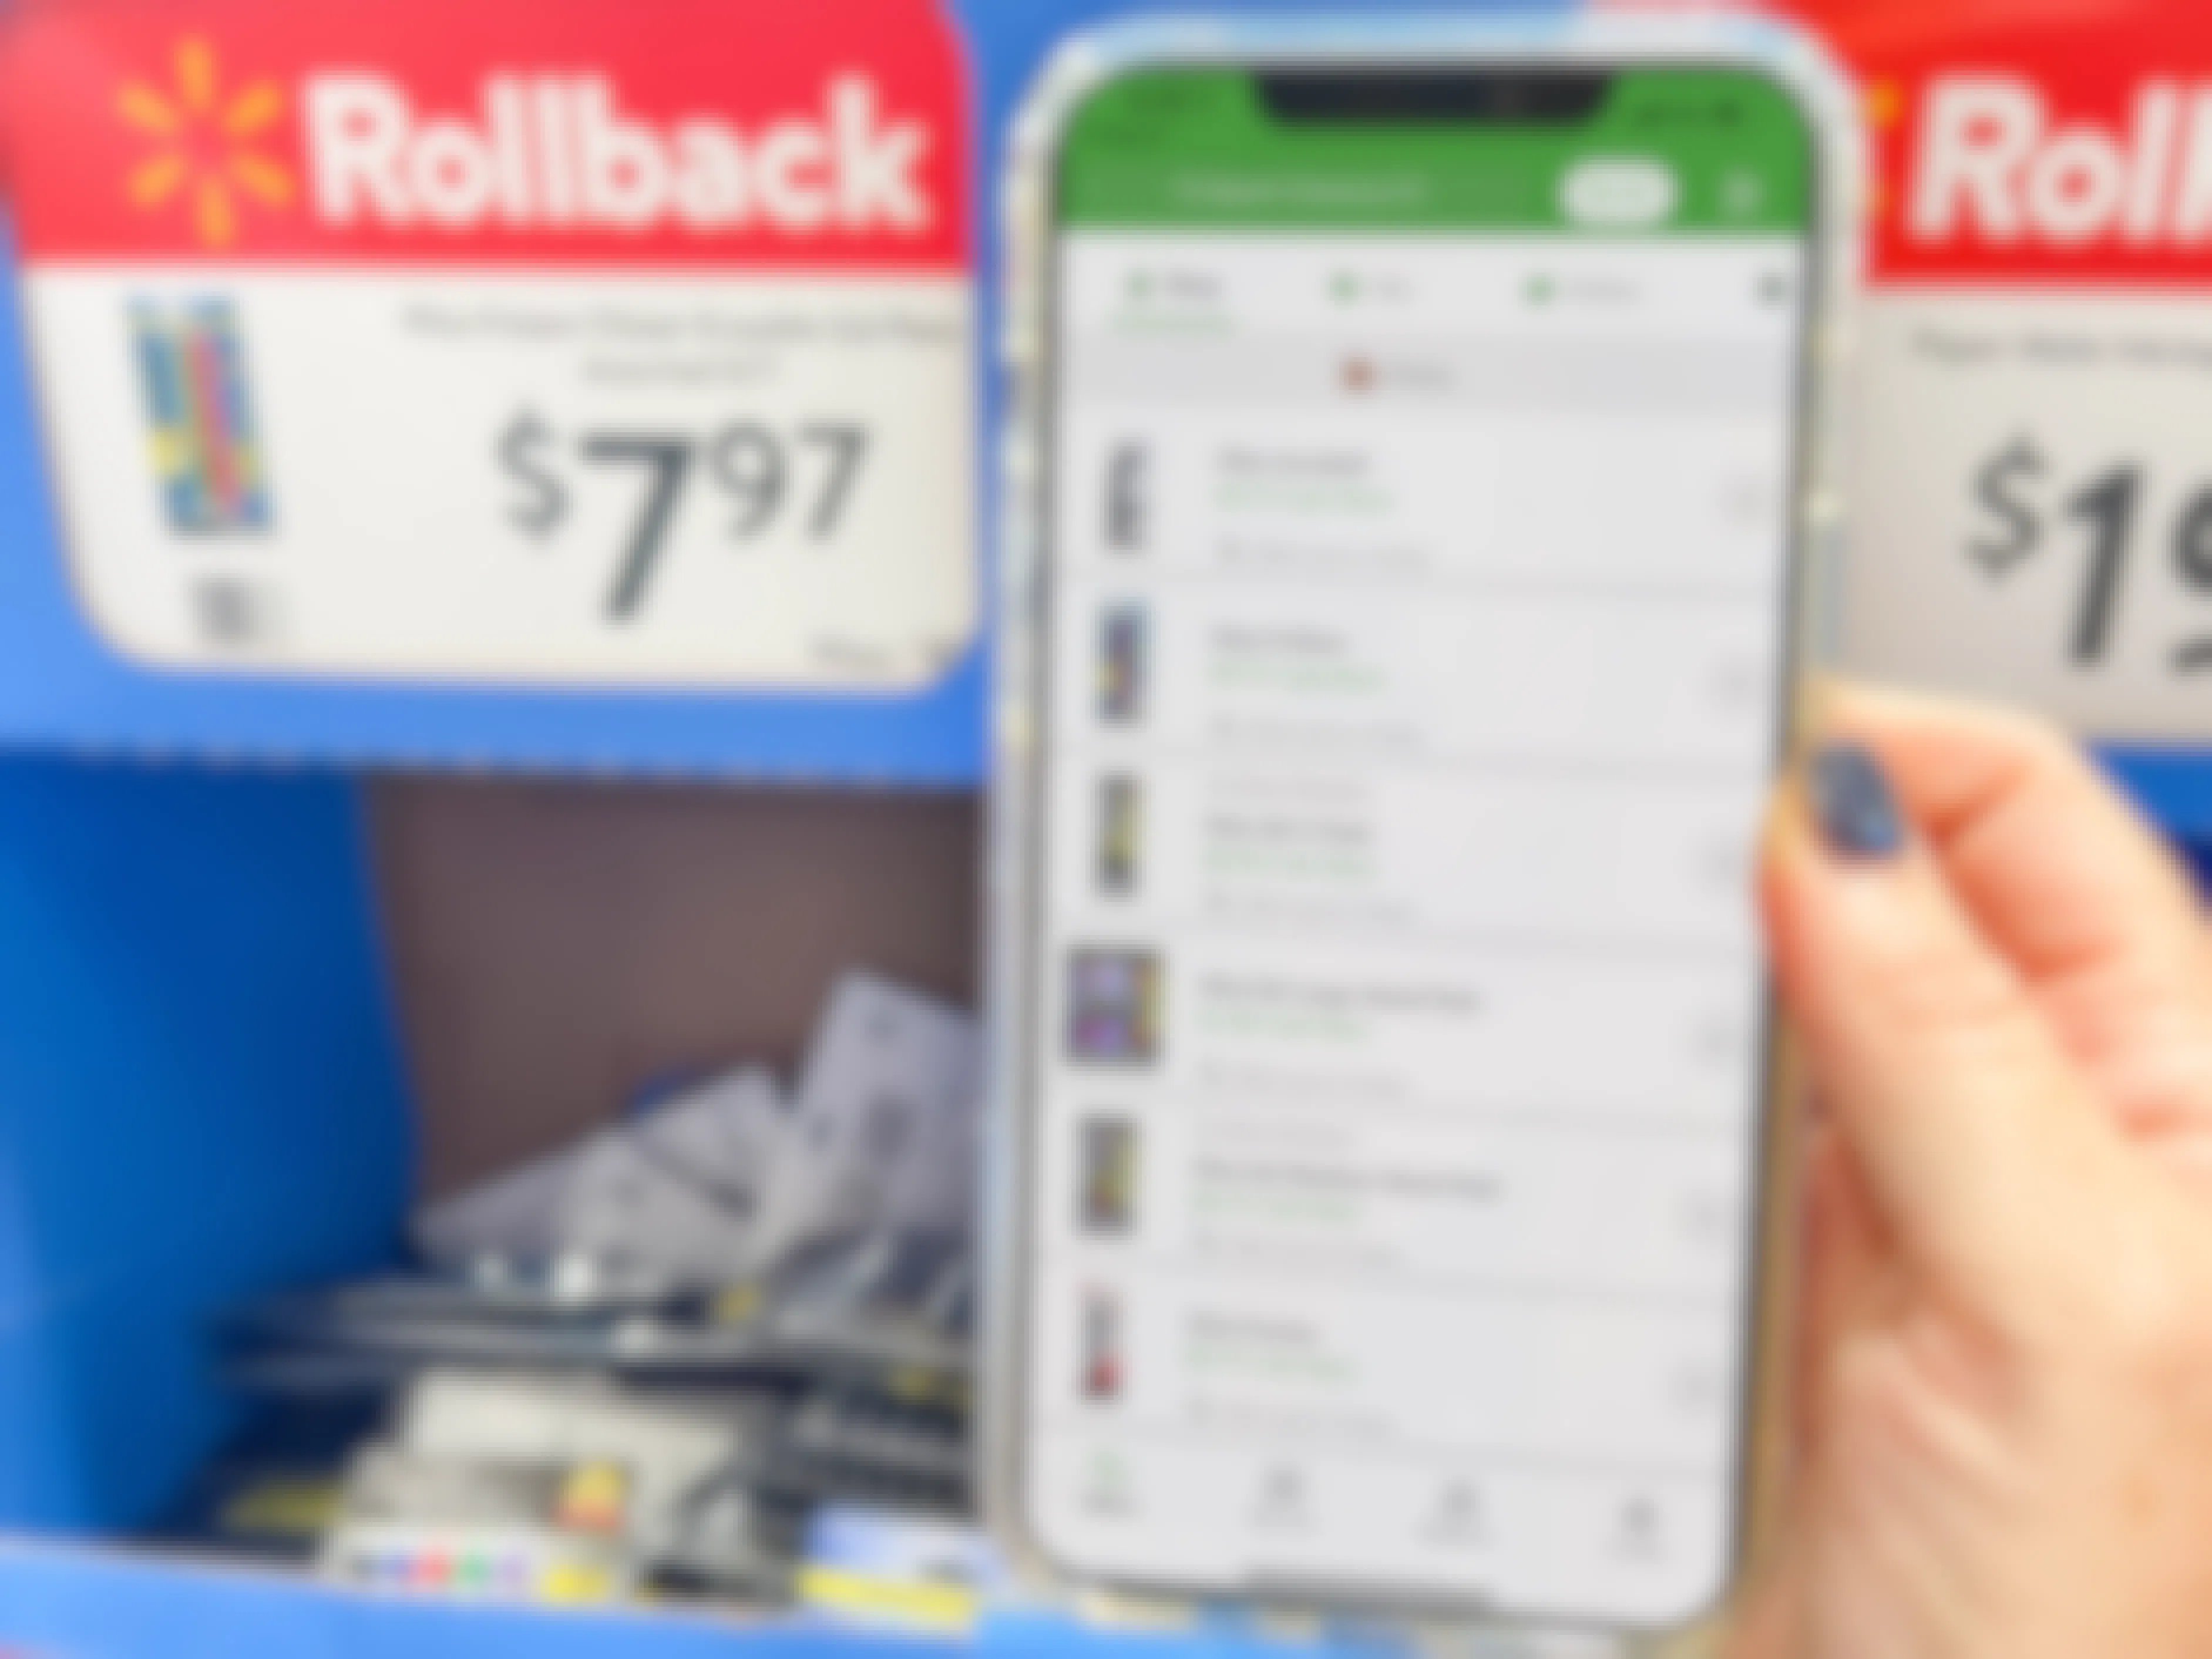 cellphone with checkout 51 app held up in front of rollback sign